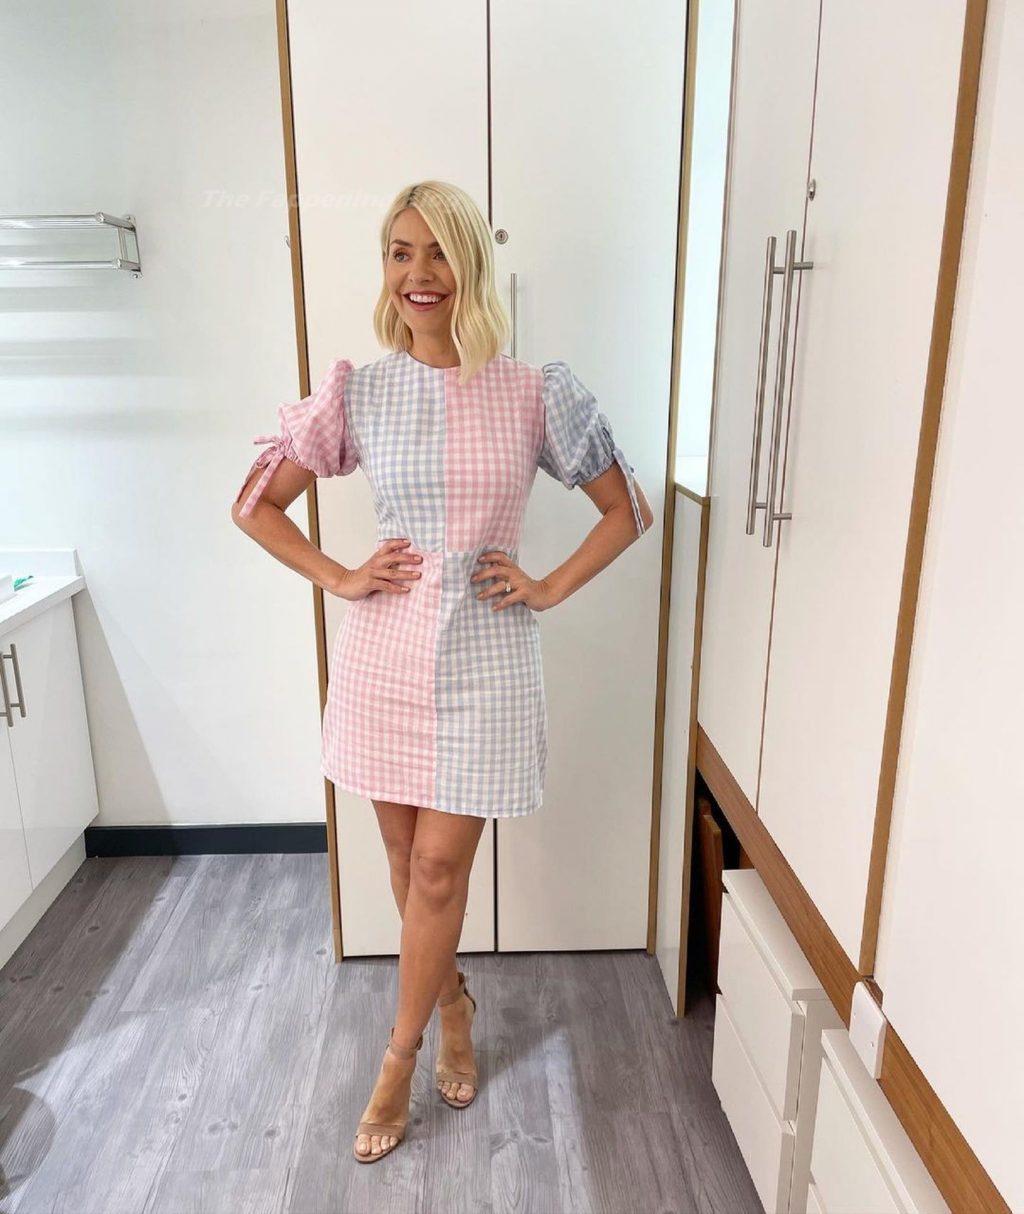 Holly Willoughby Enjoys a Segment on the Show ‘This Morning’ in London (64 Photos)